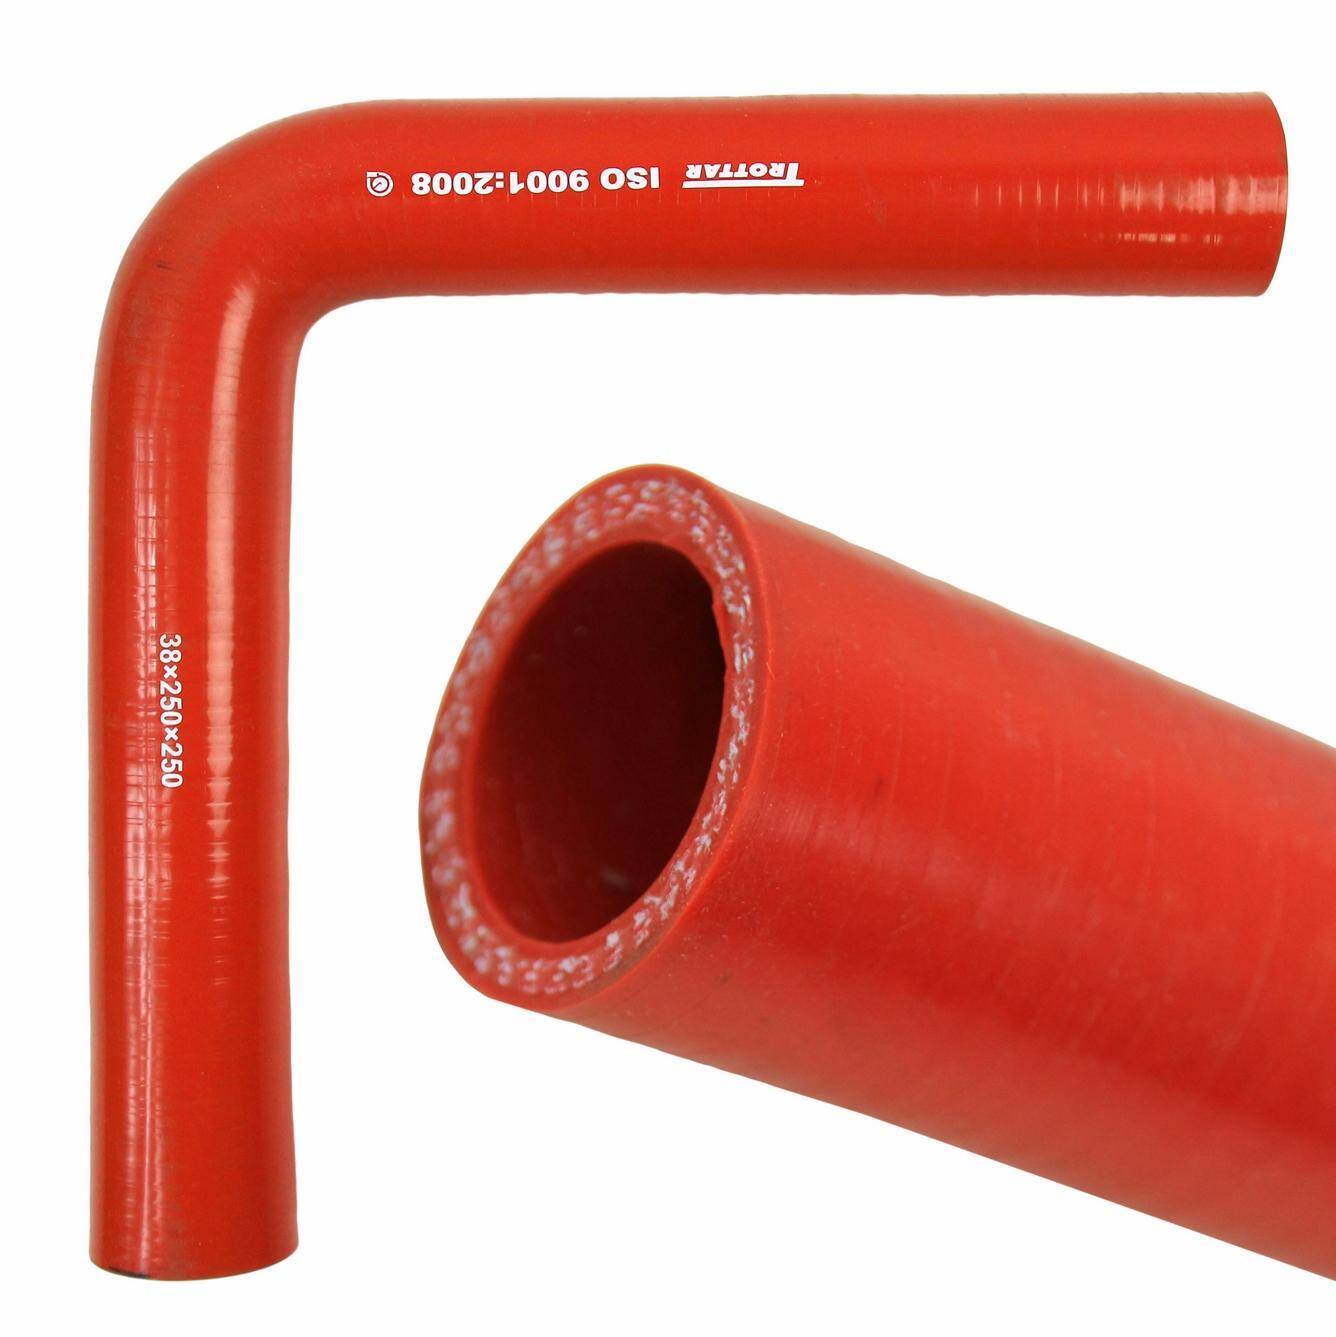 SILICONE ELBOW 90 ID 38 250X250 MM